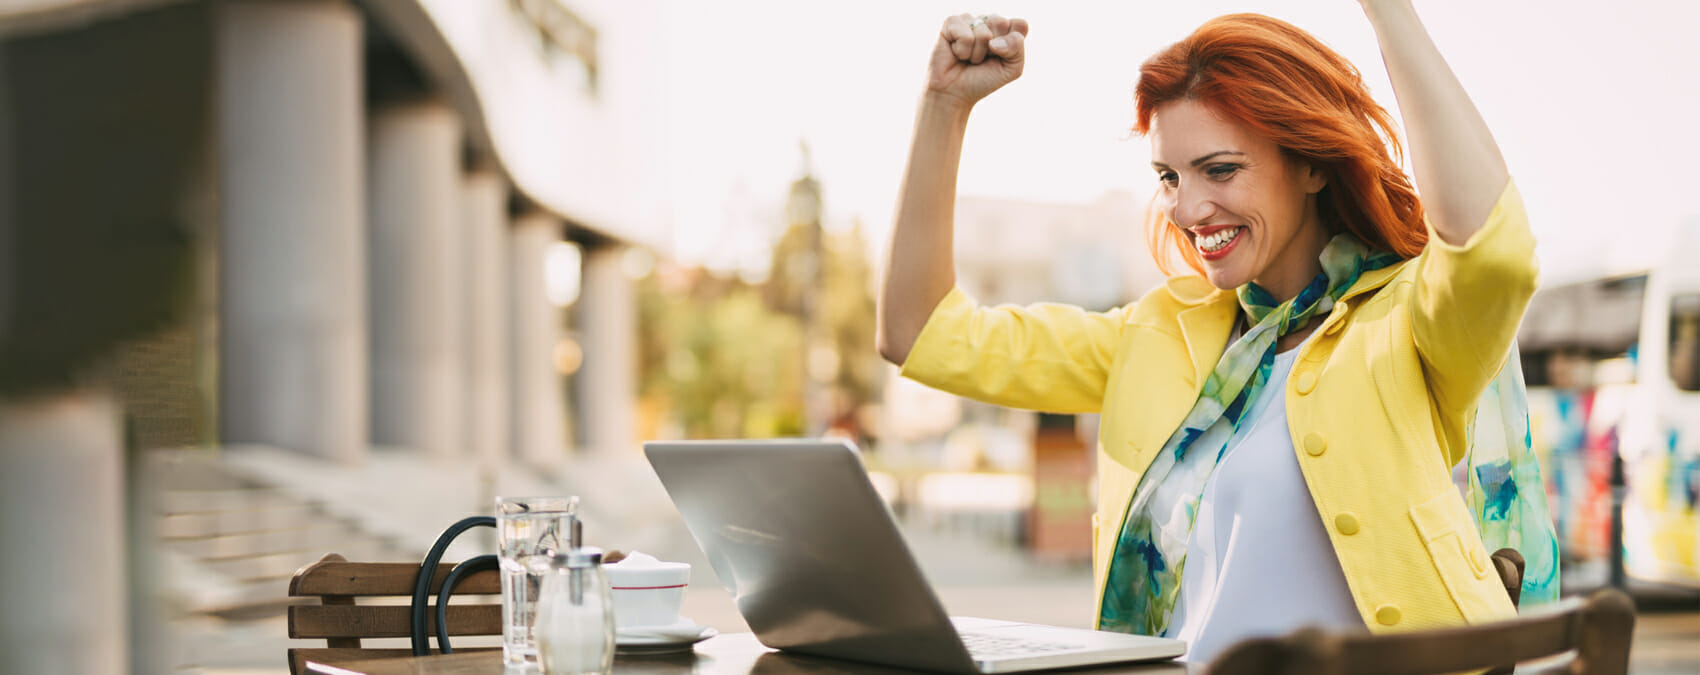 Woman smiles with her hands held above her head triumphantly while looking at a laptop